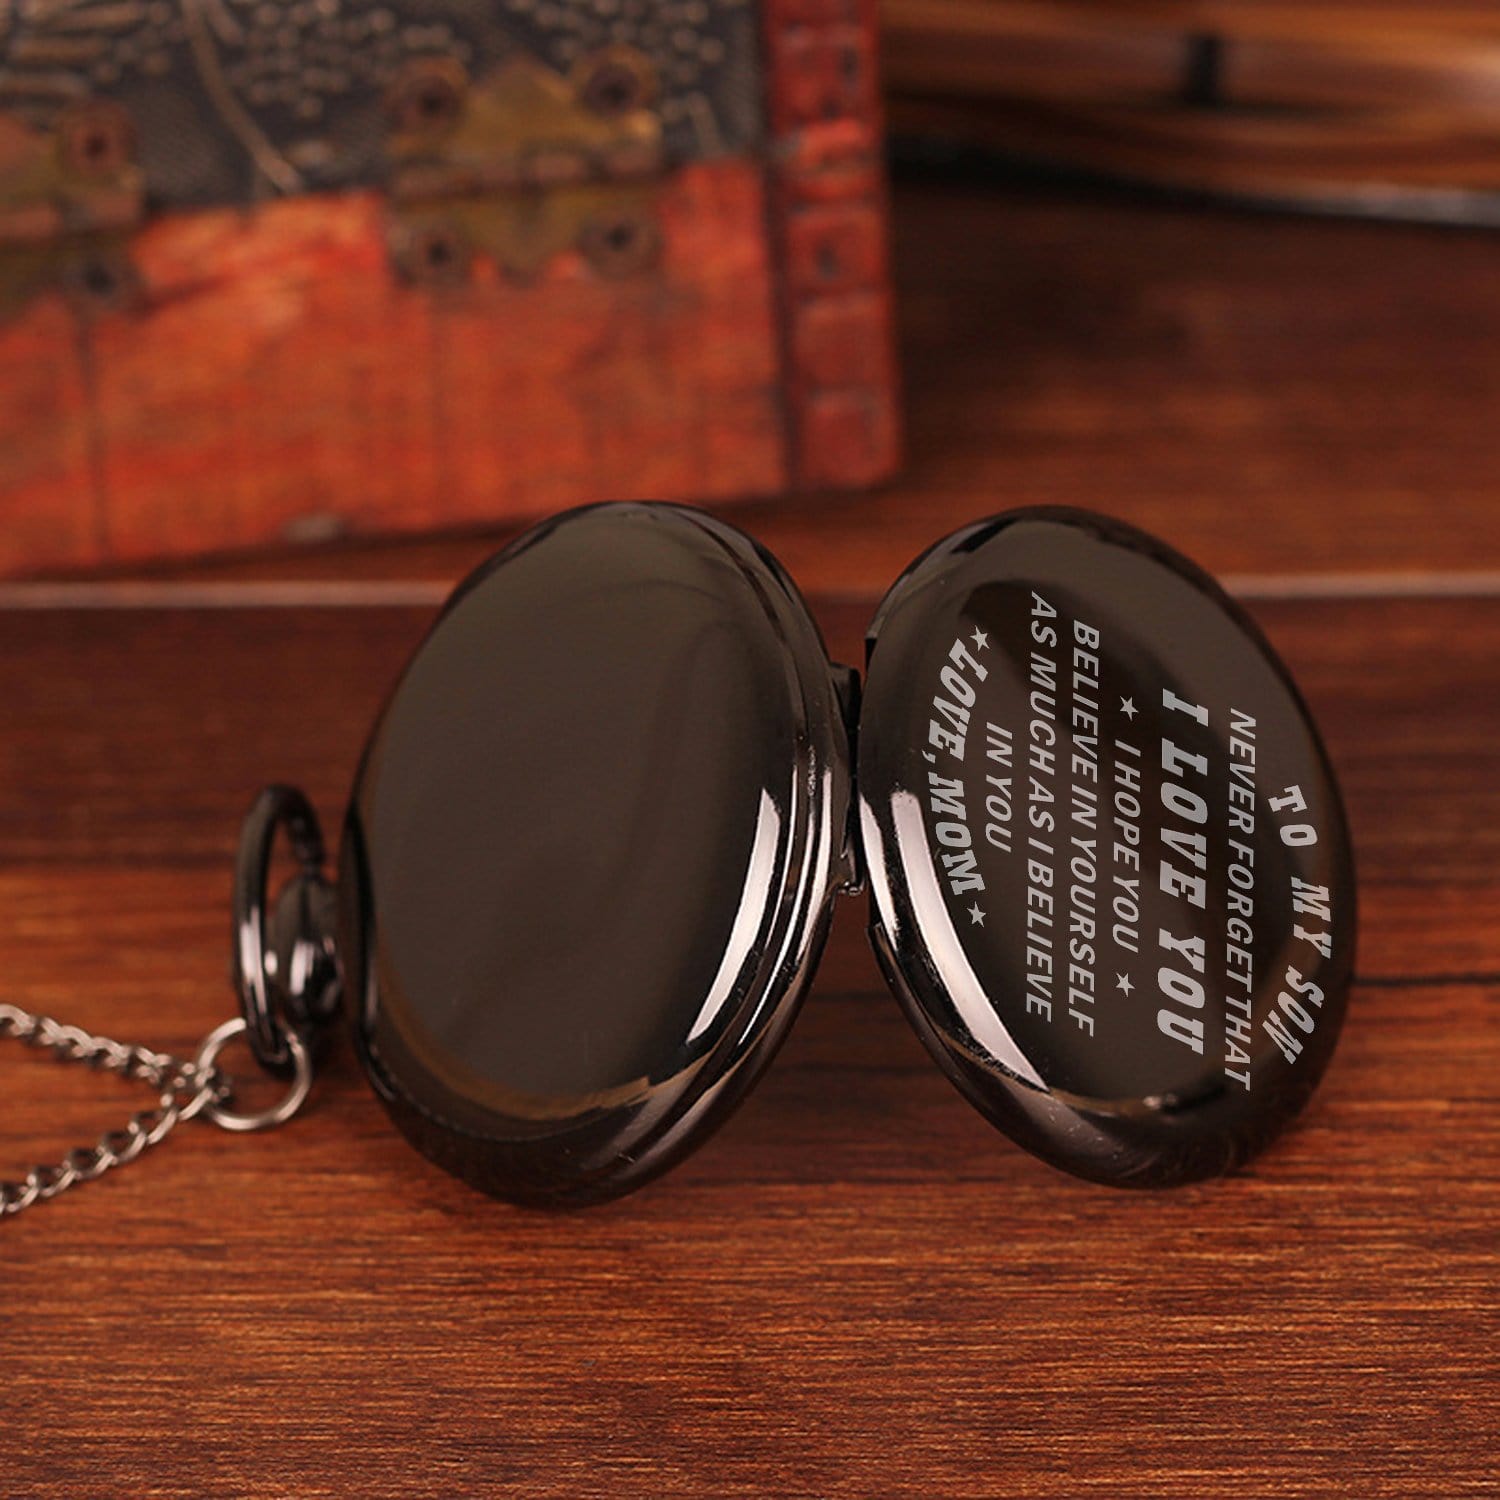 Pocket Watches Mom To Son - I Hope You Believe In Yourself Pocket Watch GiveMe-Gifts